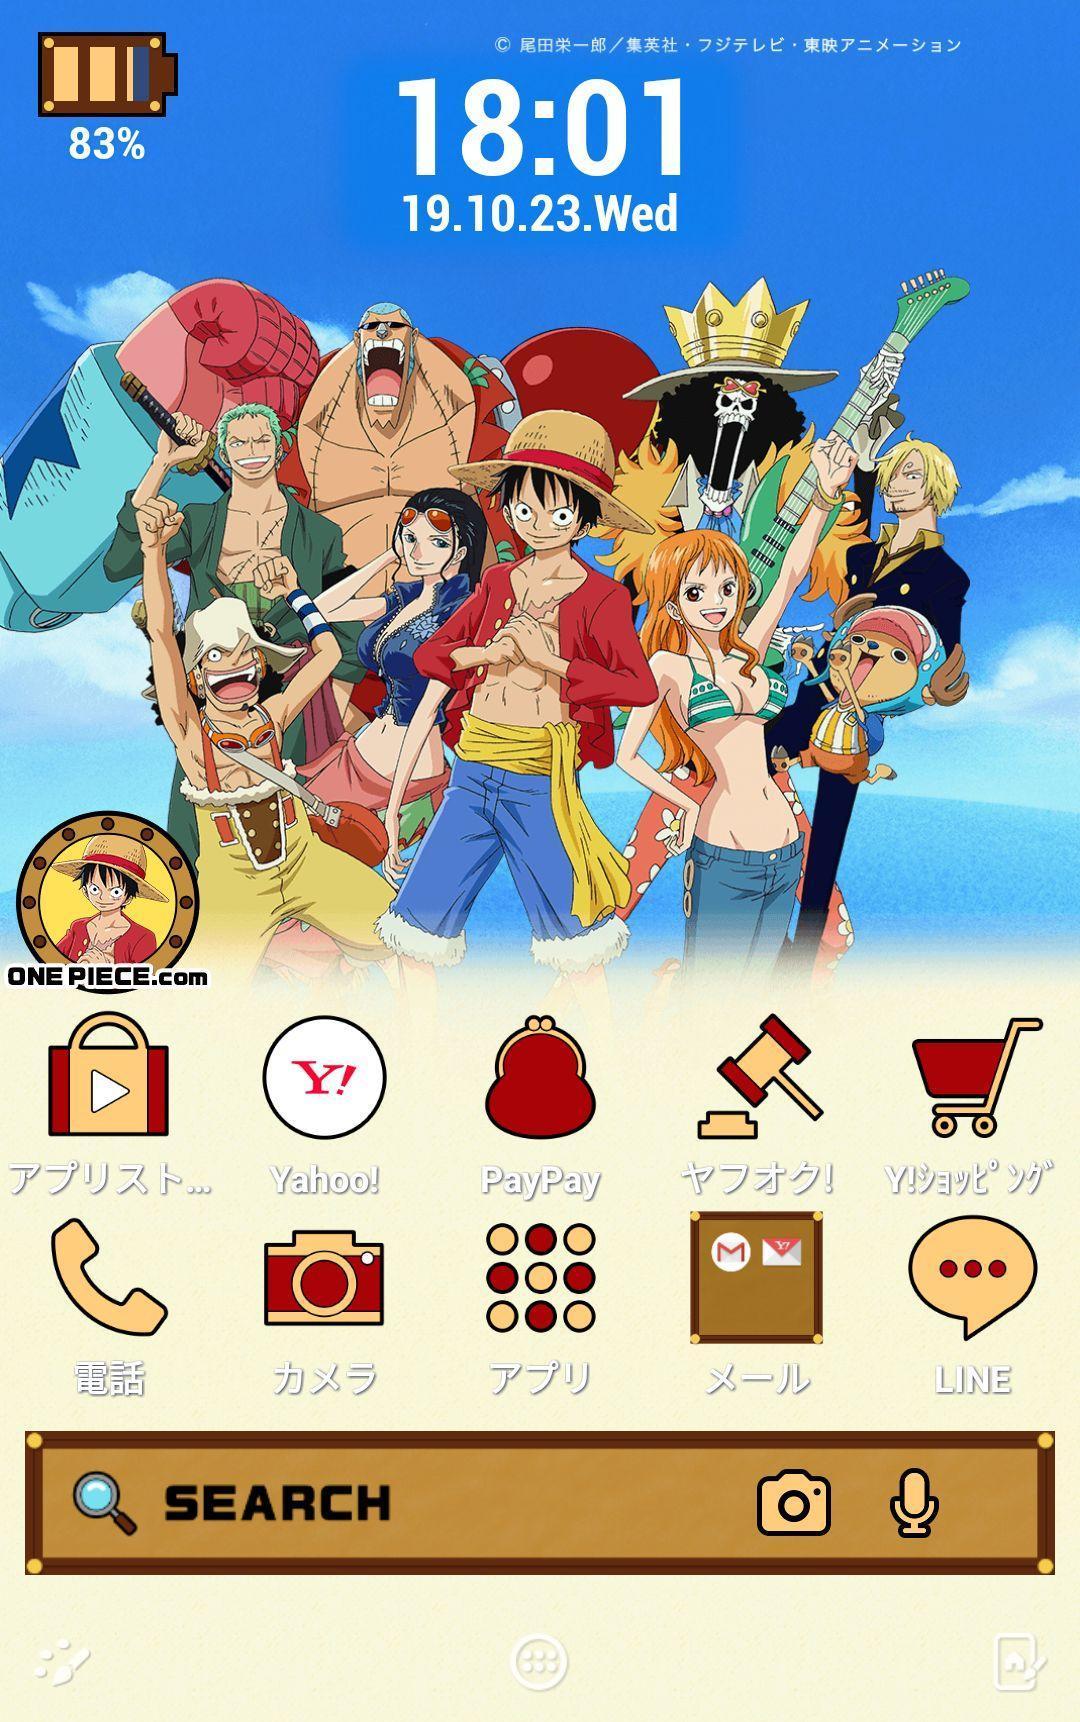 One Piece 壁紙きせかえ ホールケーキアイランド編 For Android Apk Download